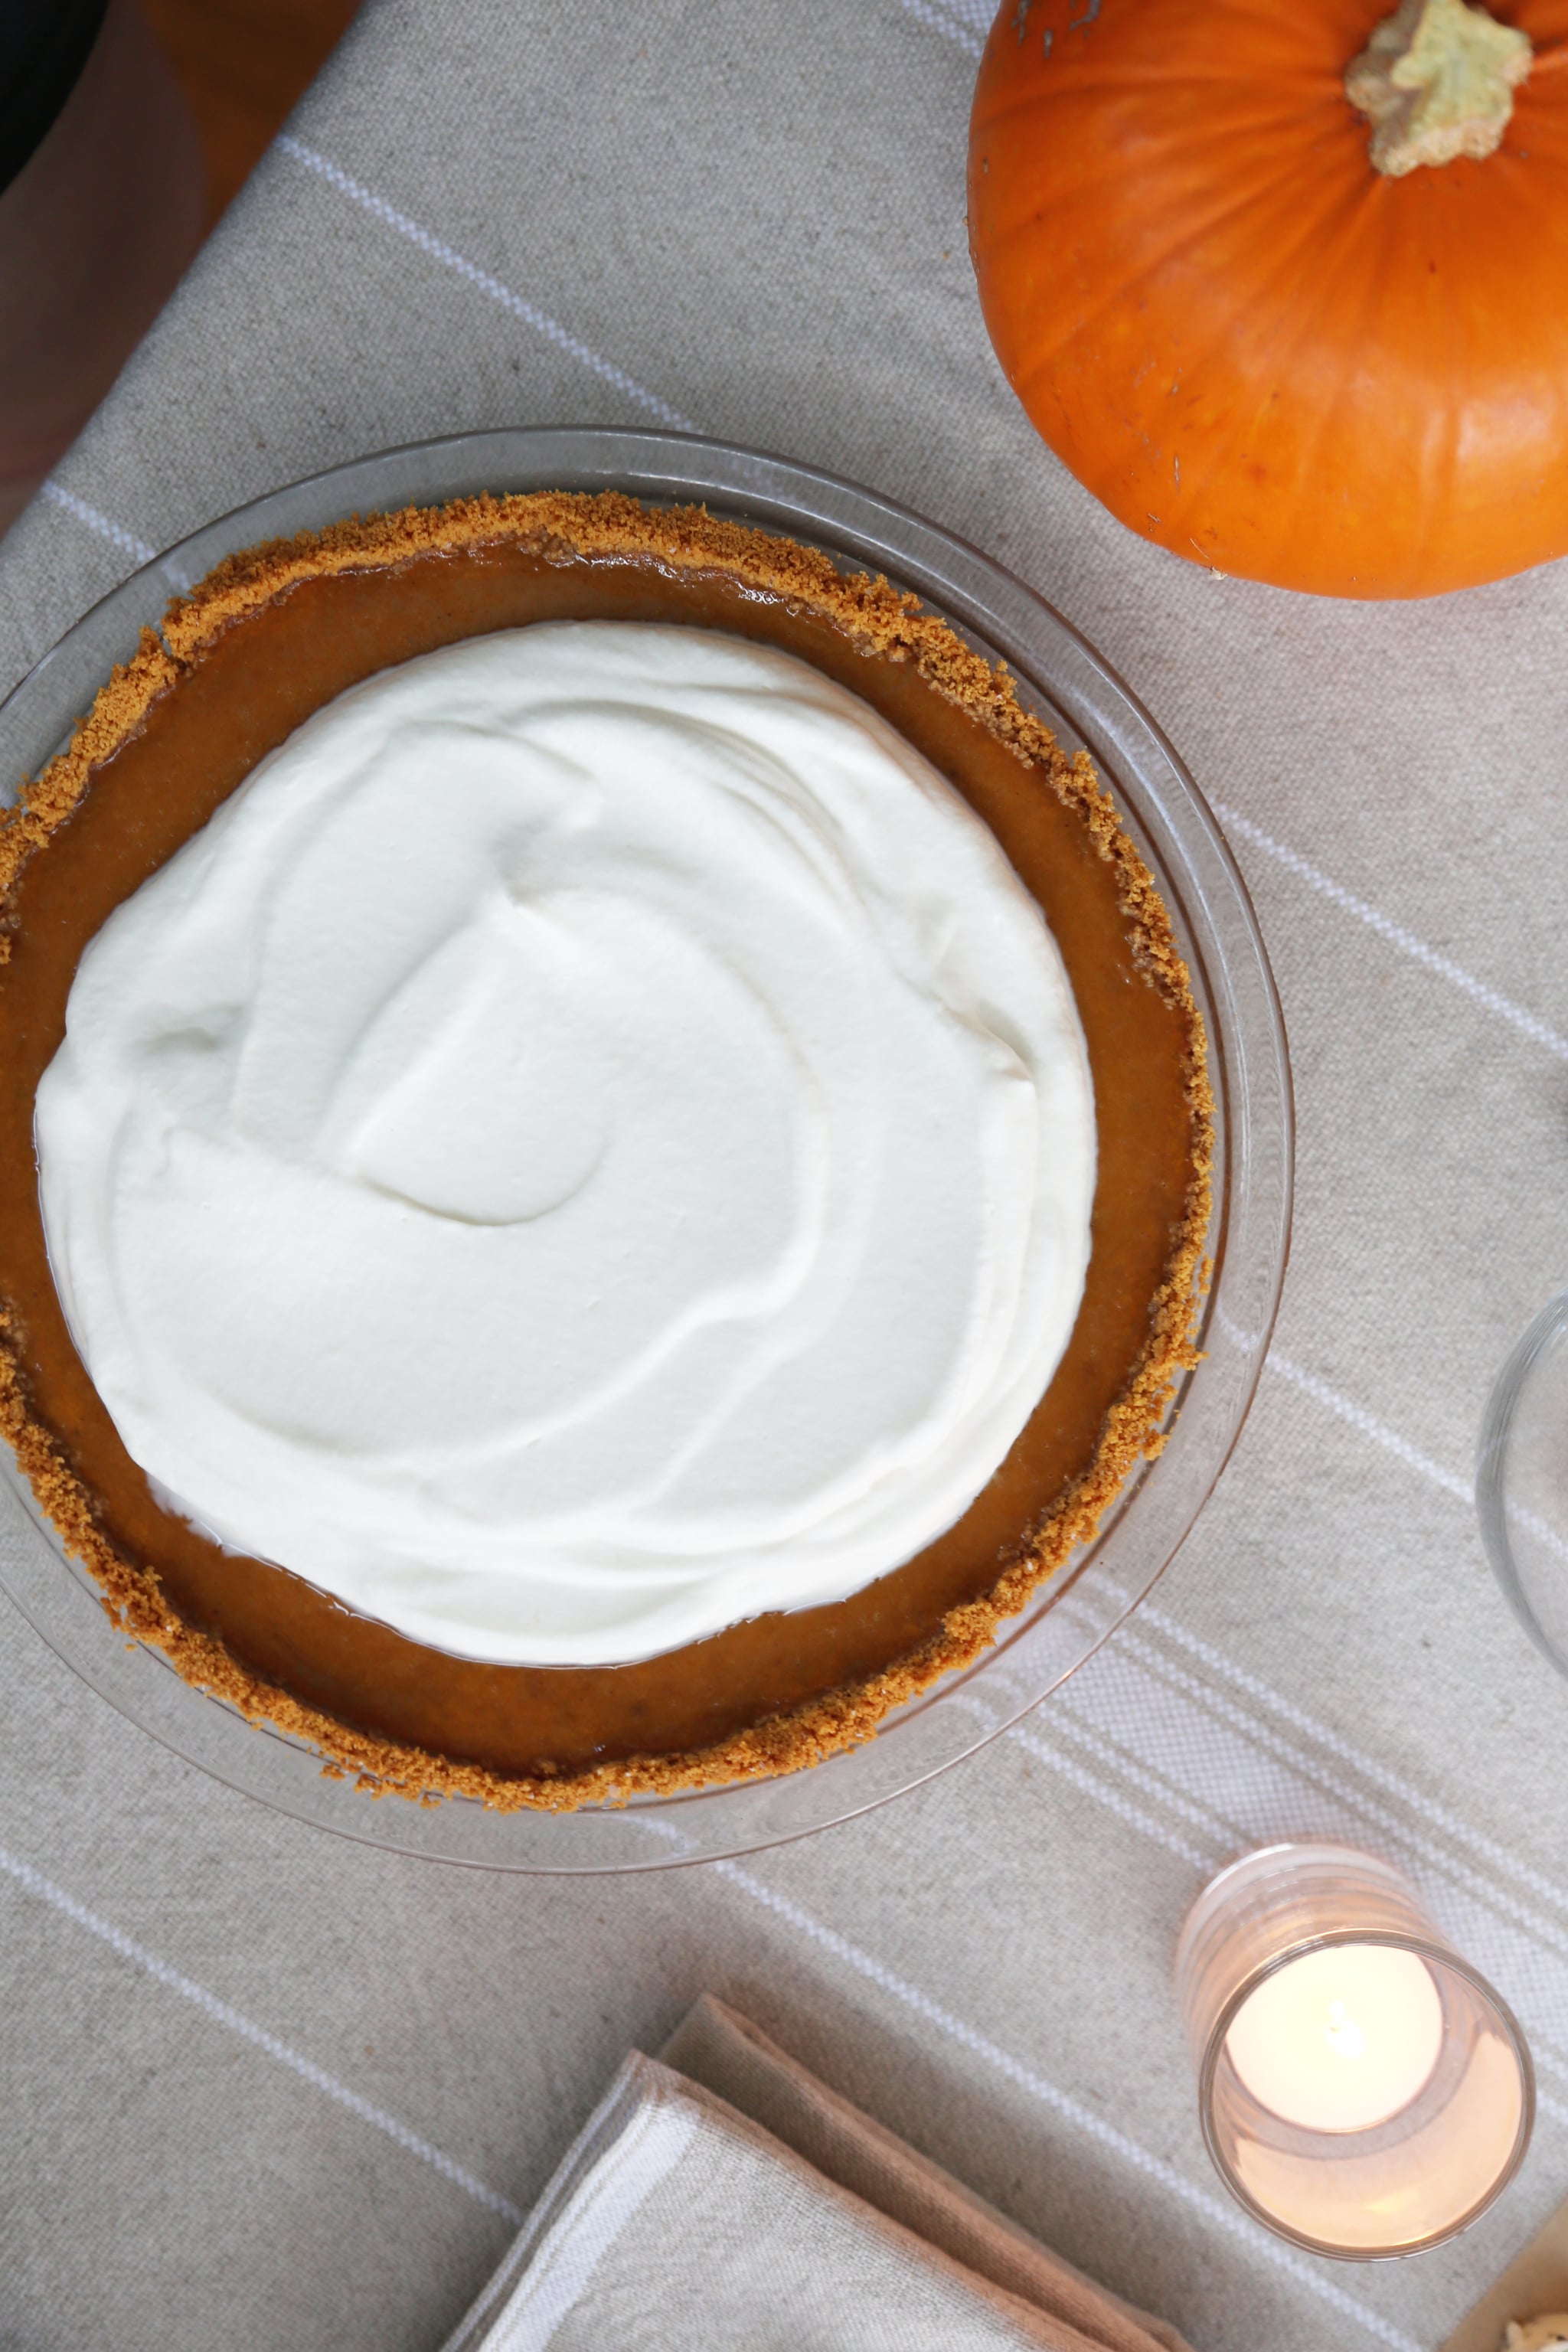 Does pumpkin pie need to be refrigerated?